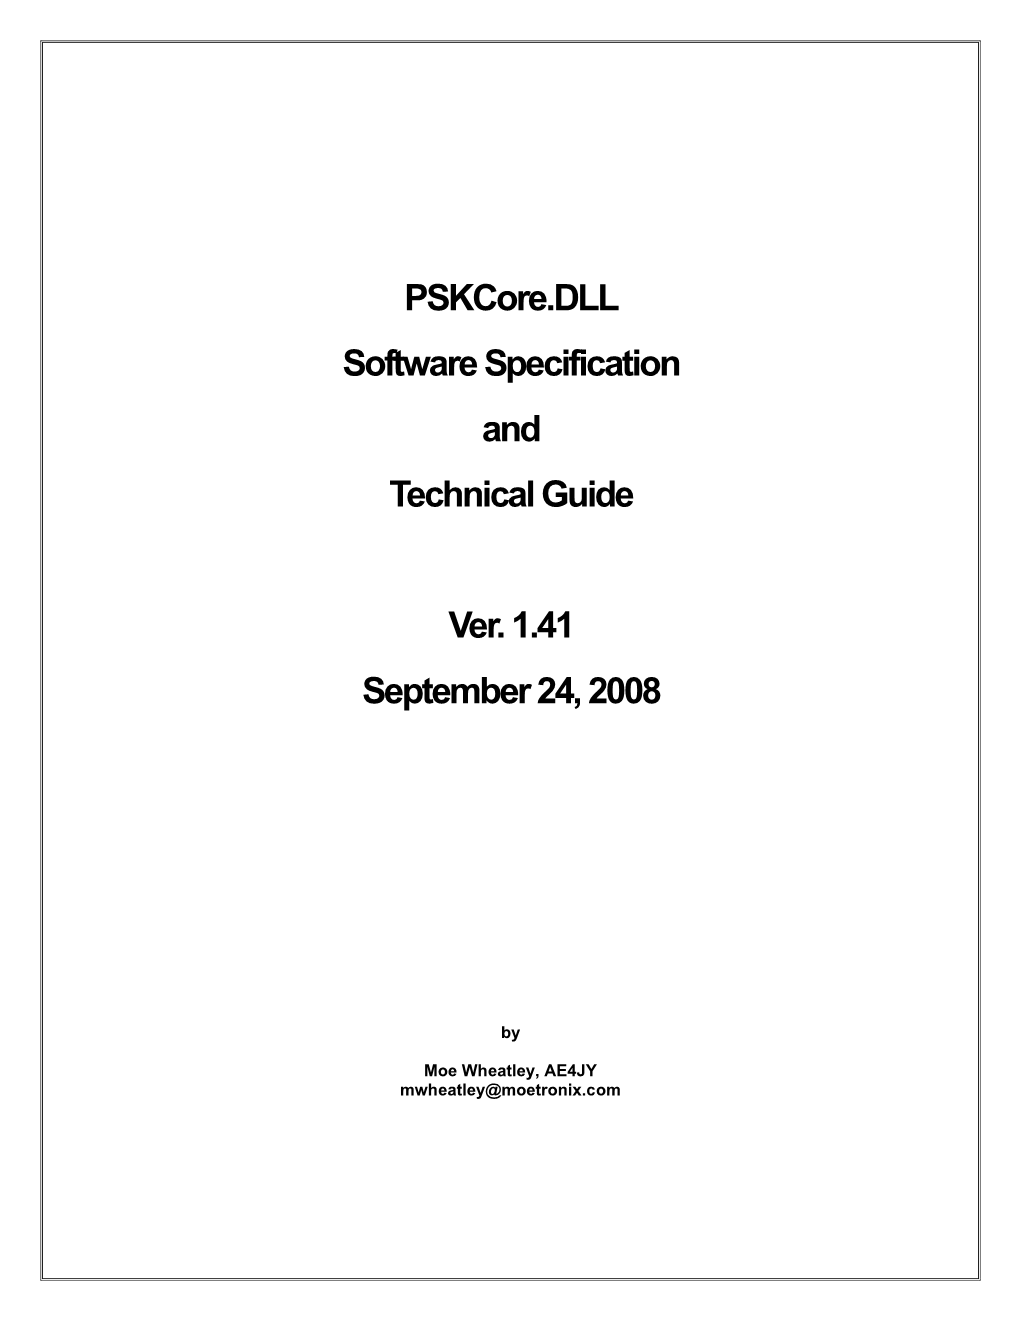 Pskcore.DLL Software Specification and Technical Guide Ver. 1.41